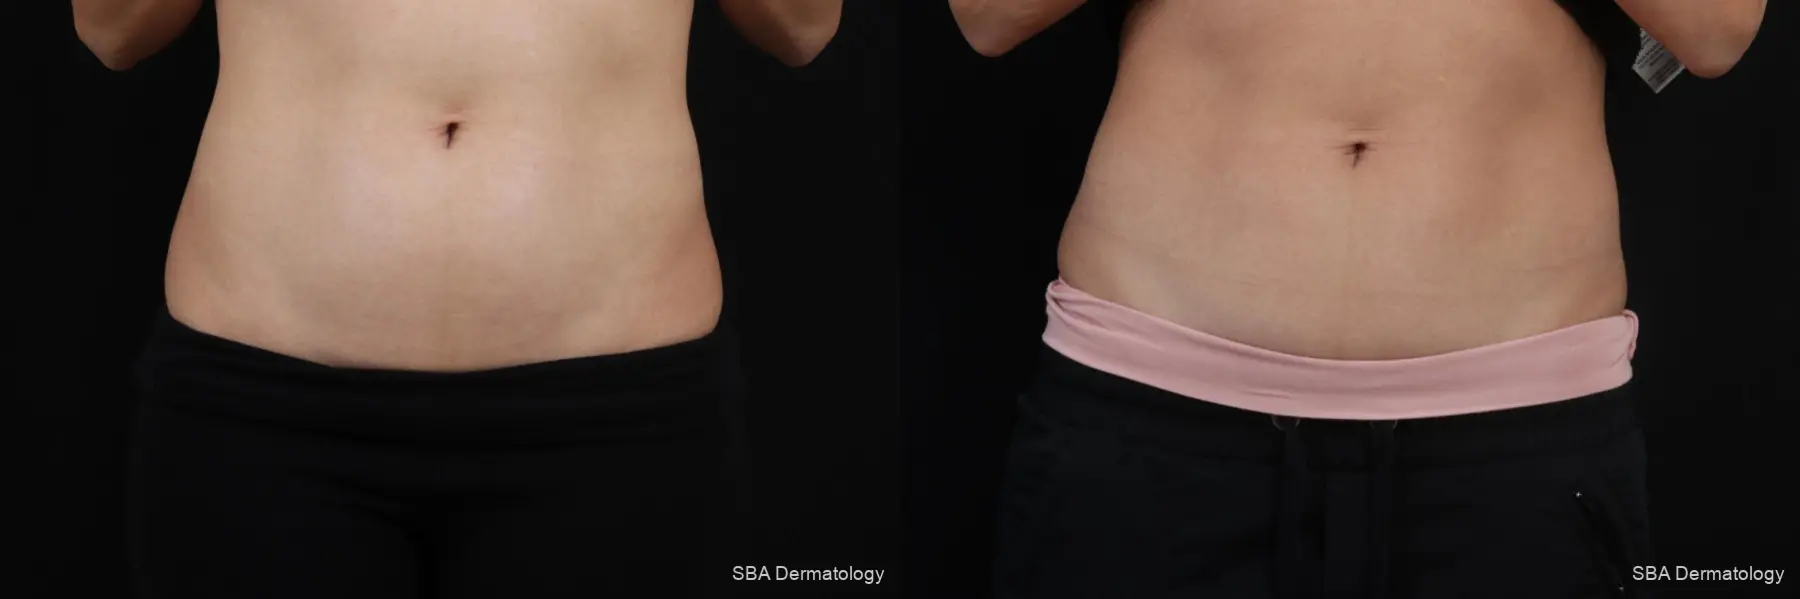 Coolsculpting: Patient 8 - Before and After  